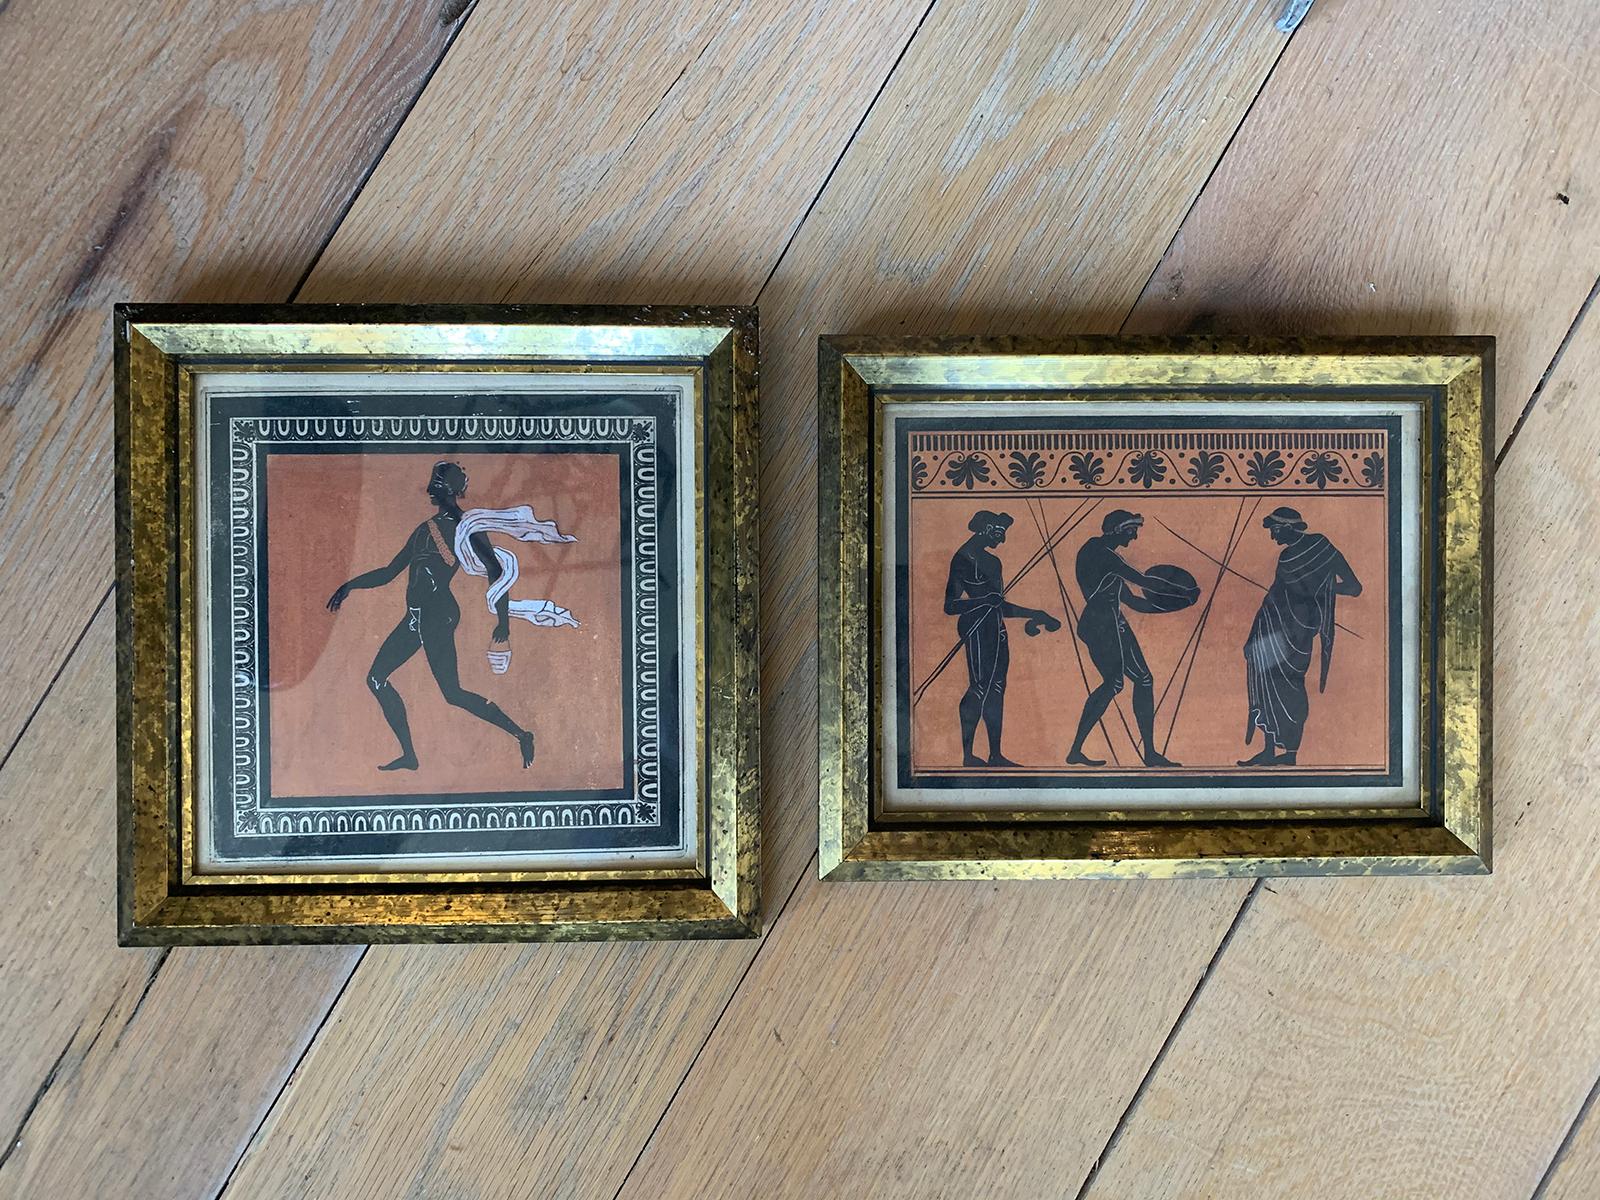 Framed pair of 18th-19th century English neoclassical Greco-Roman Engravings in the style of Sir William Hamilton
Measures: Left: 9.25